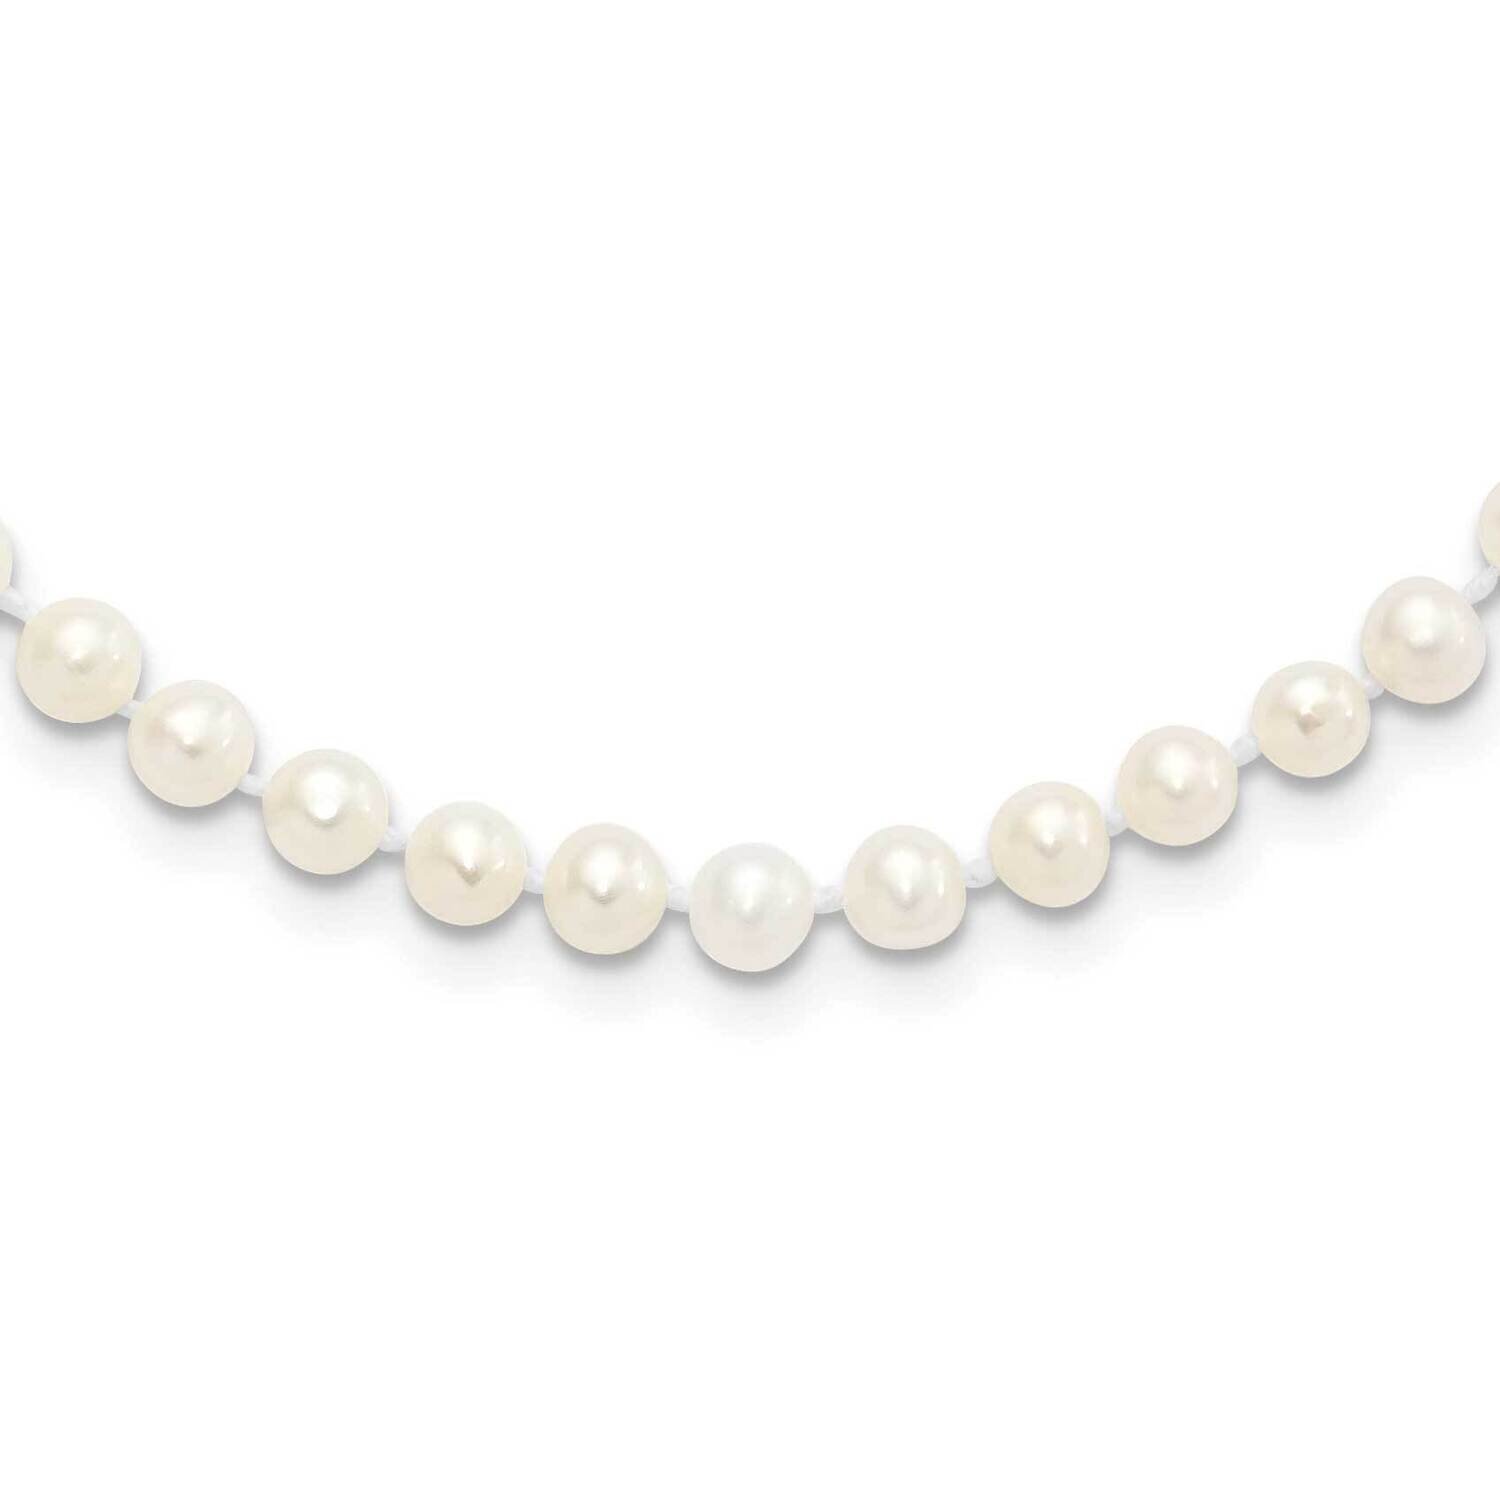 4-5mm White Cultured Freshwater Pearl Necklace Sterling Silver Rhodium-plated QH5311-28